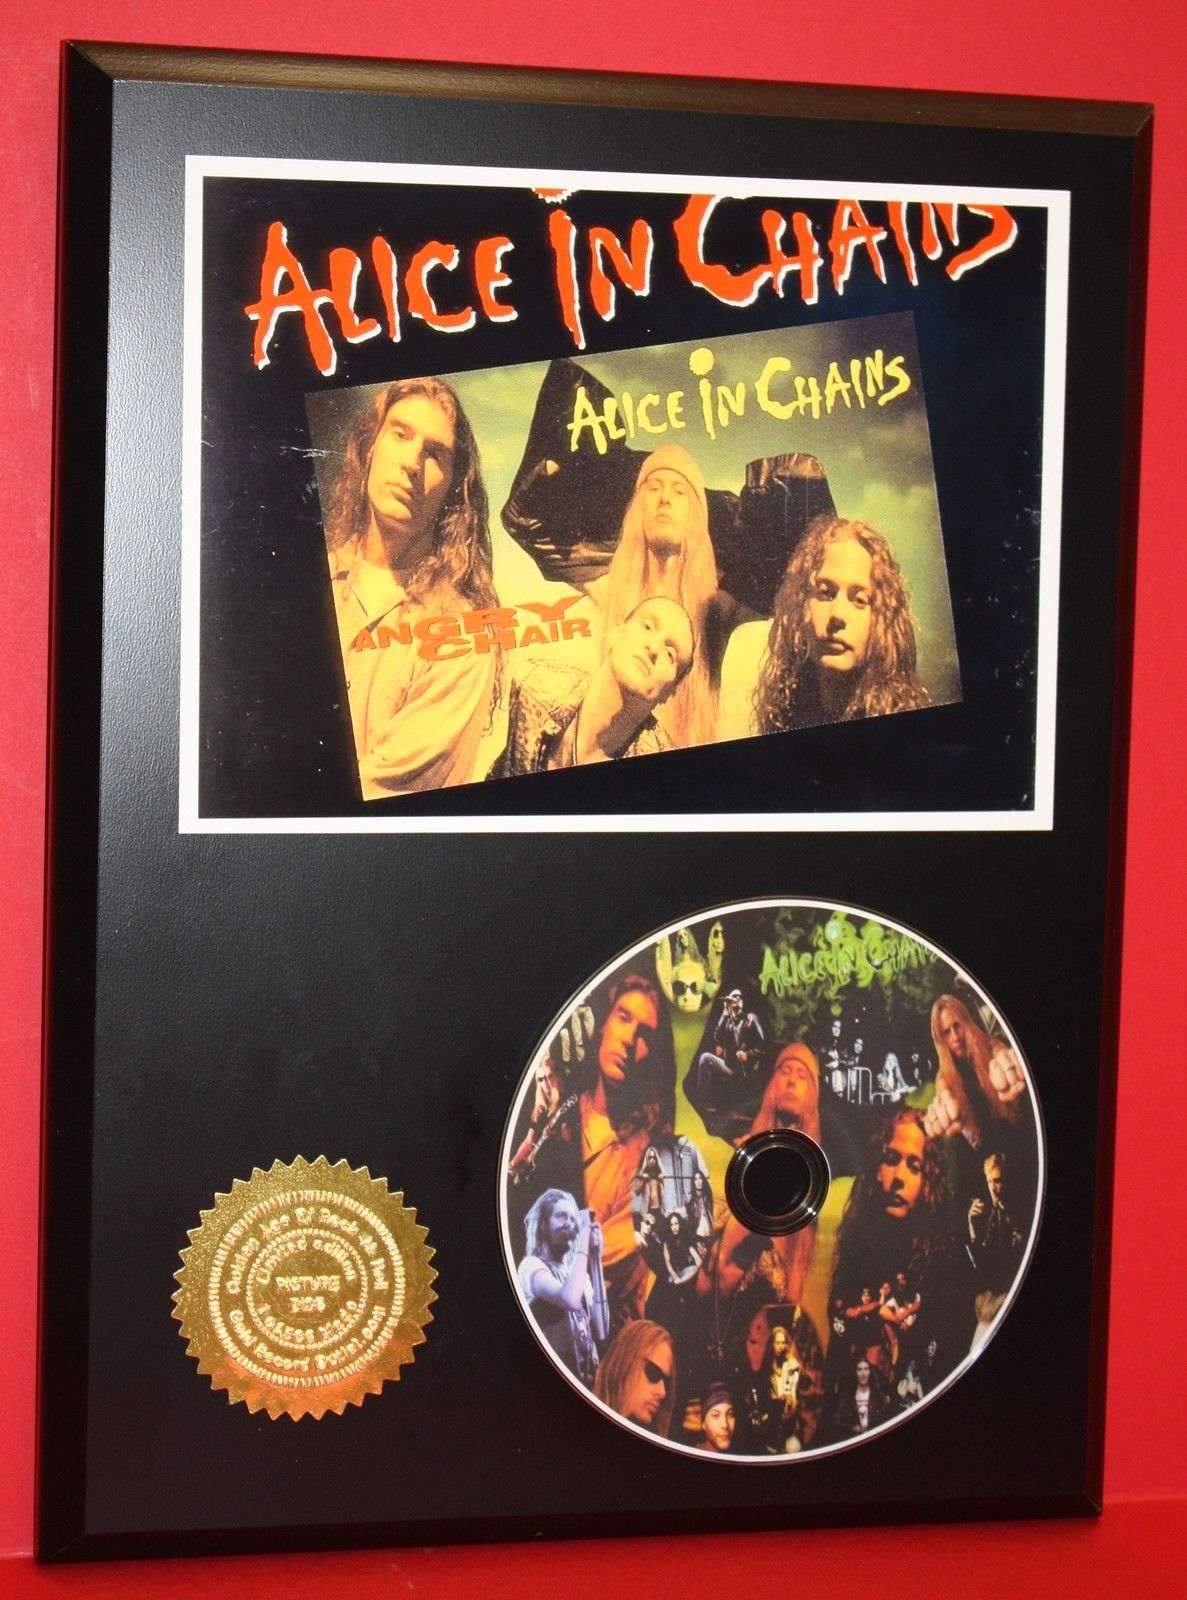 Alice In Chains Limited Edition Picture CD Disc Collectible Rare Wall Art -  Gold Record Outlet Album and Disc Collectible Memorabilia